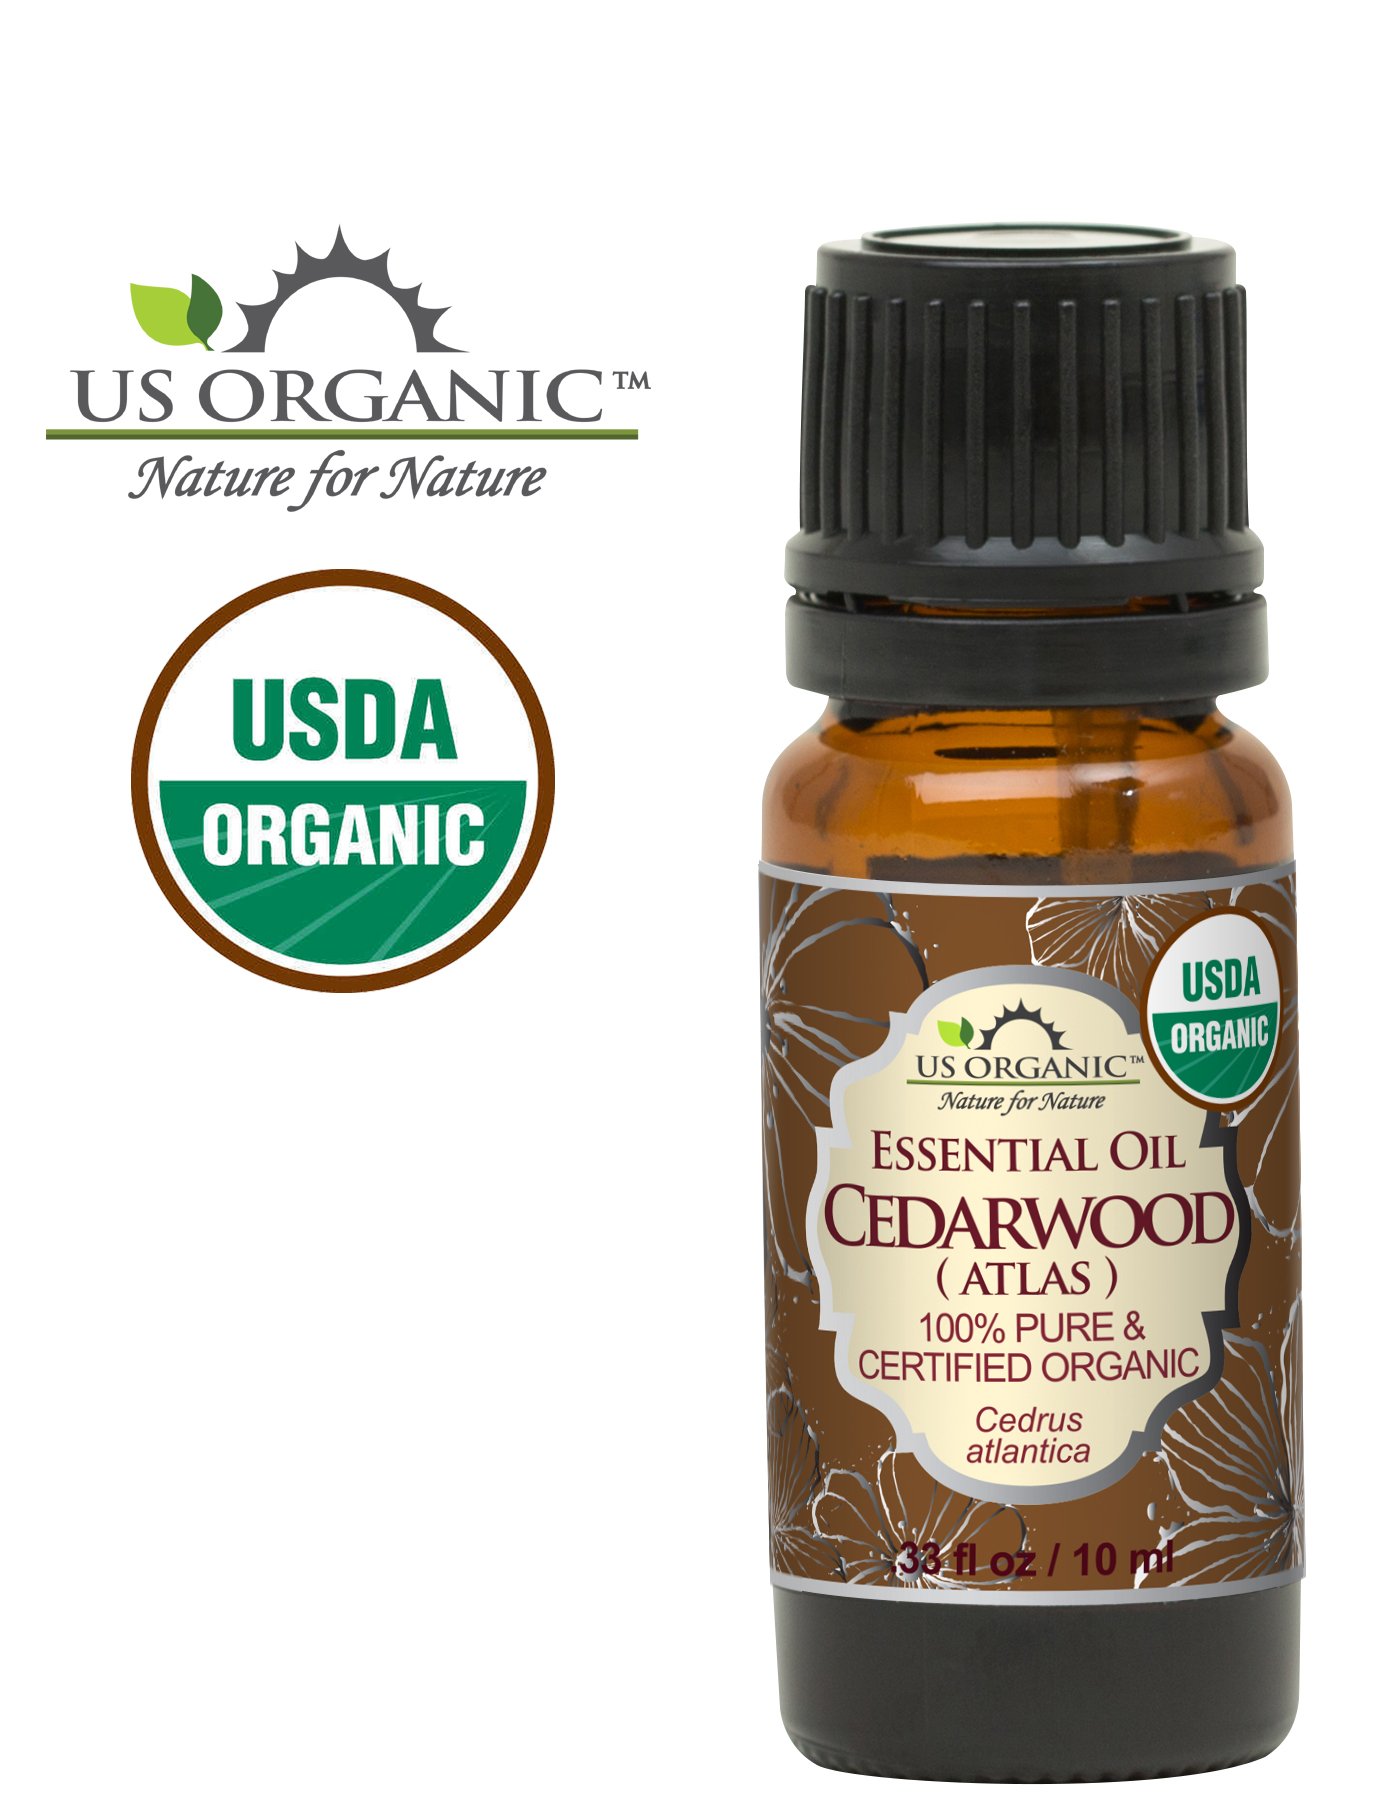 US Organic 100% Pure Cedarwood Essential Oil (Atlas) - USDA Certified Organic, Steam Distilled (More Size Variations Available) (10 ml / .33 fl oz)